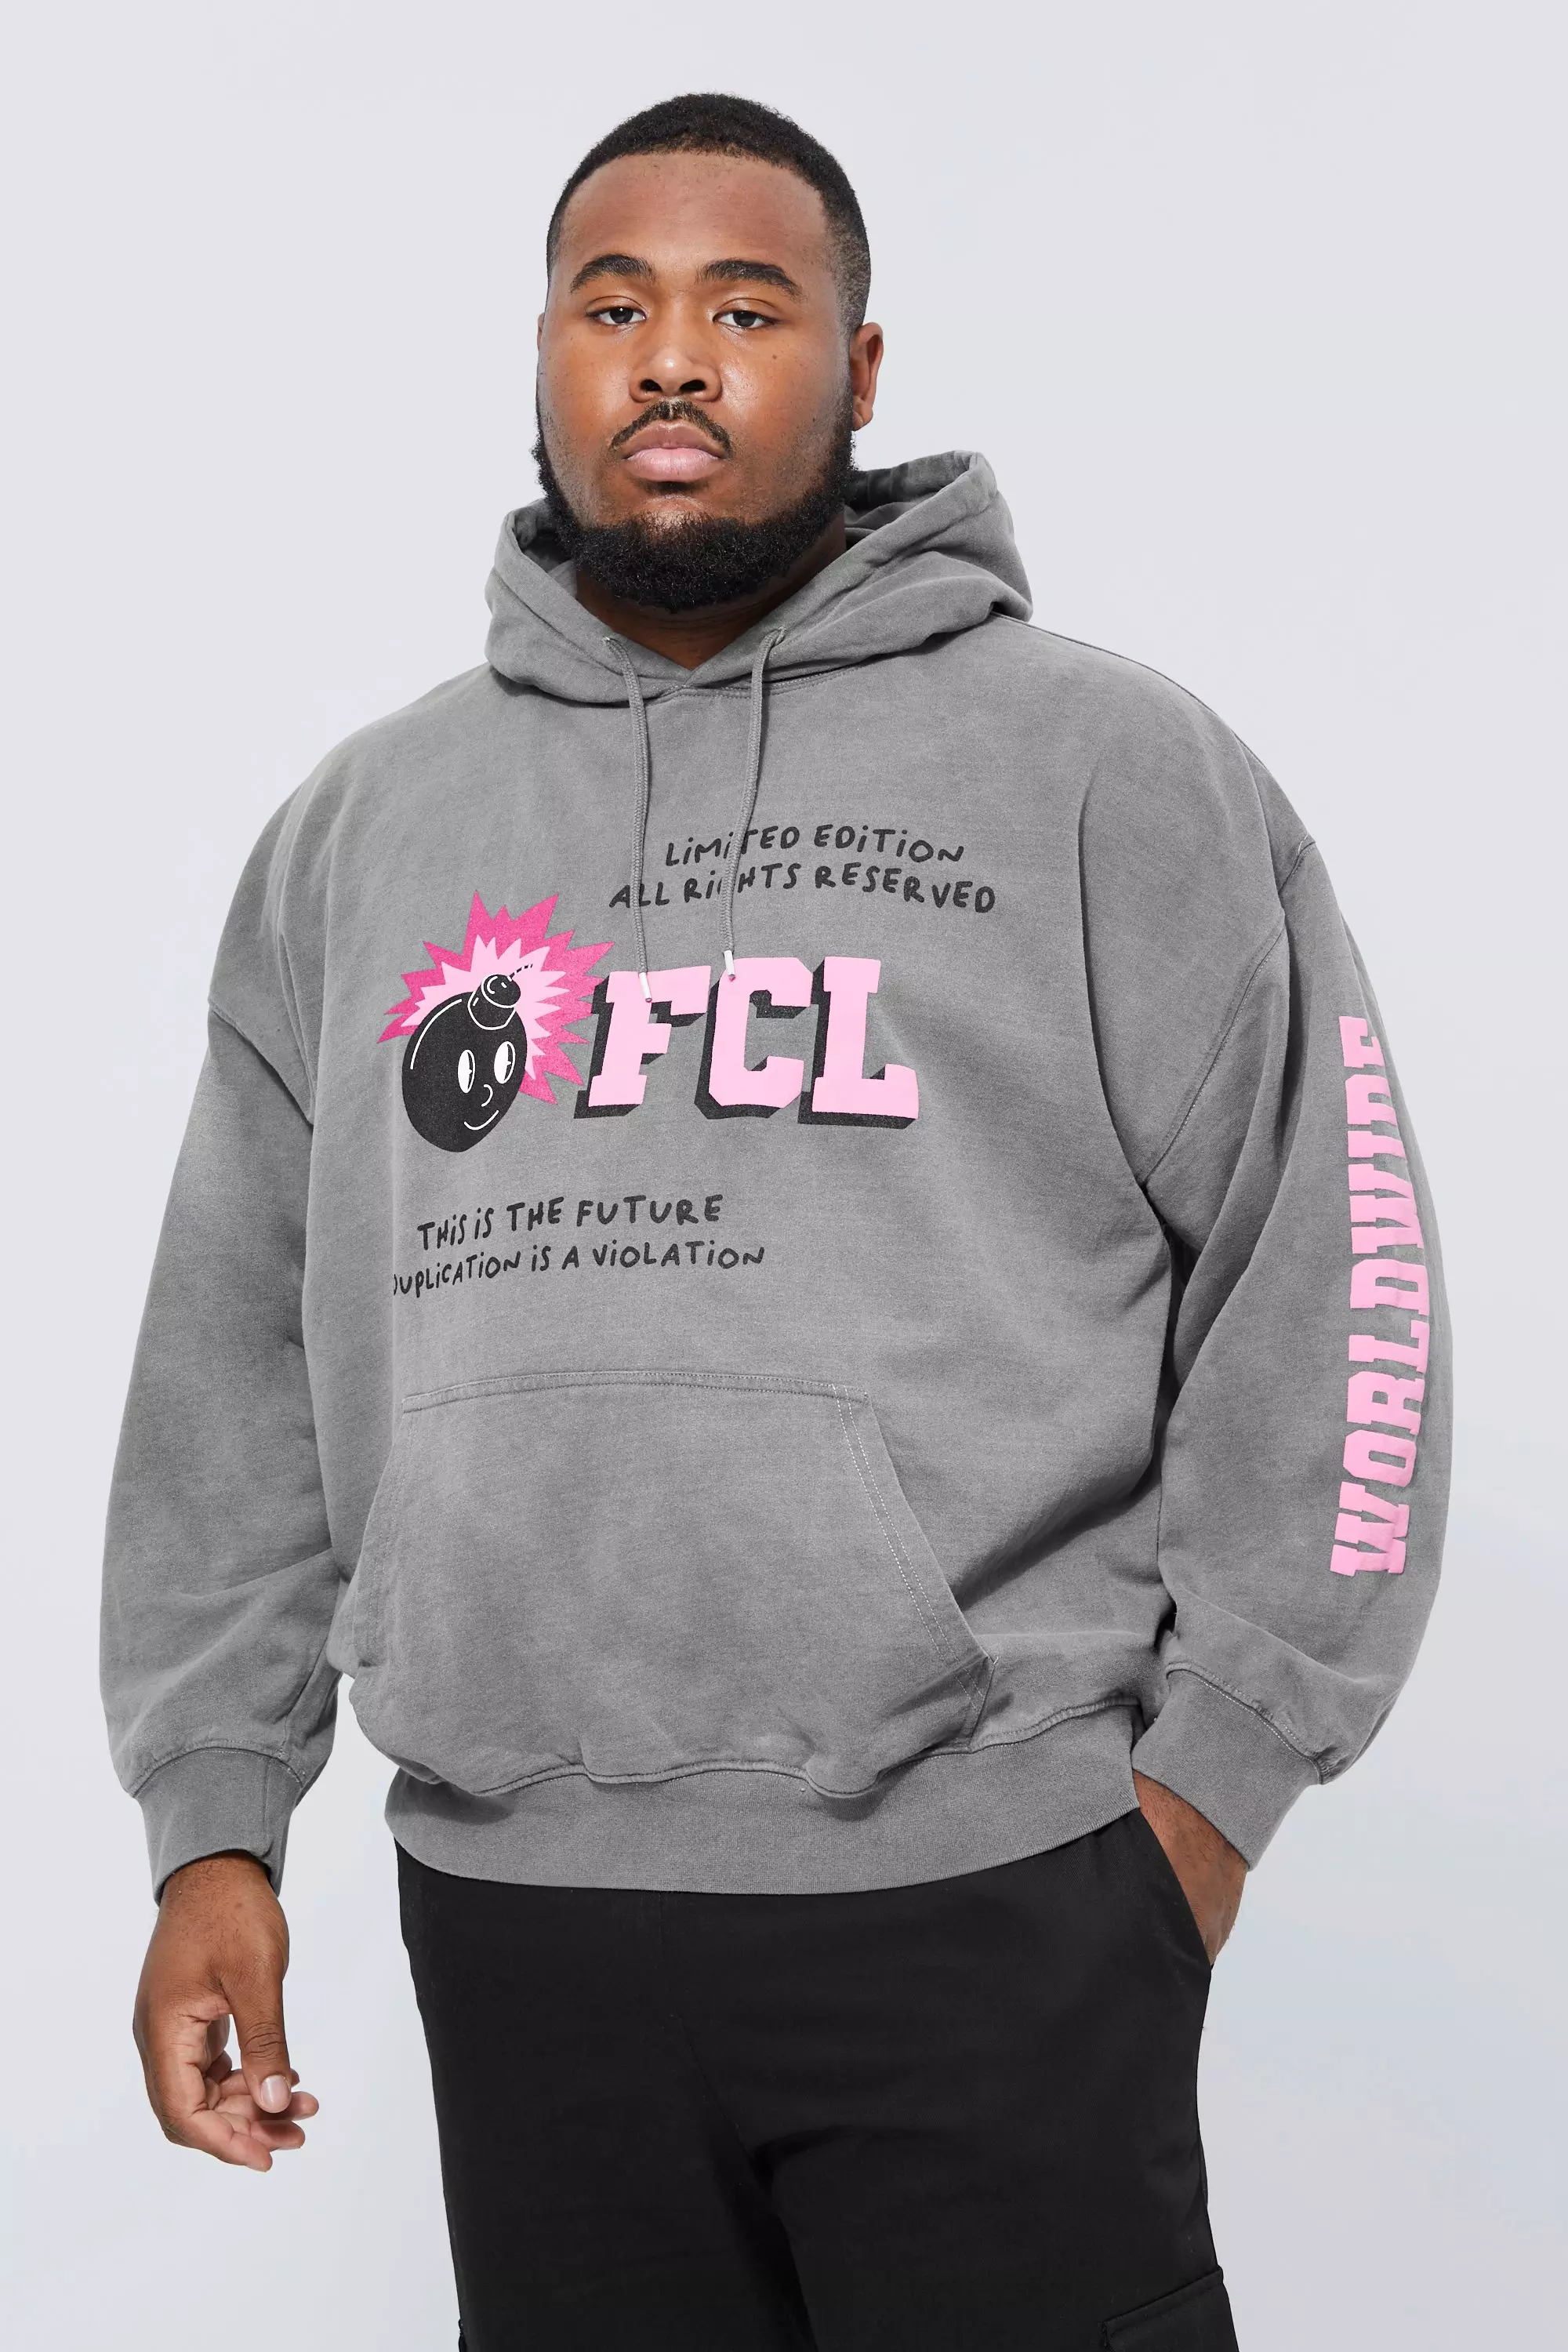 Plus Ofcl Graphic Hoodie